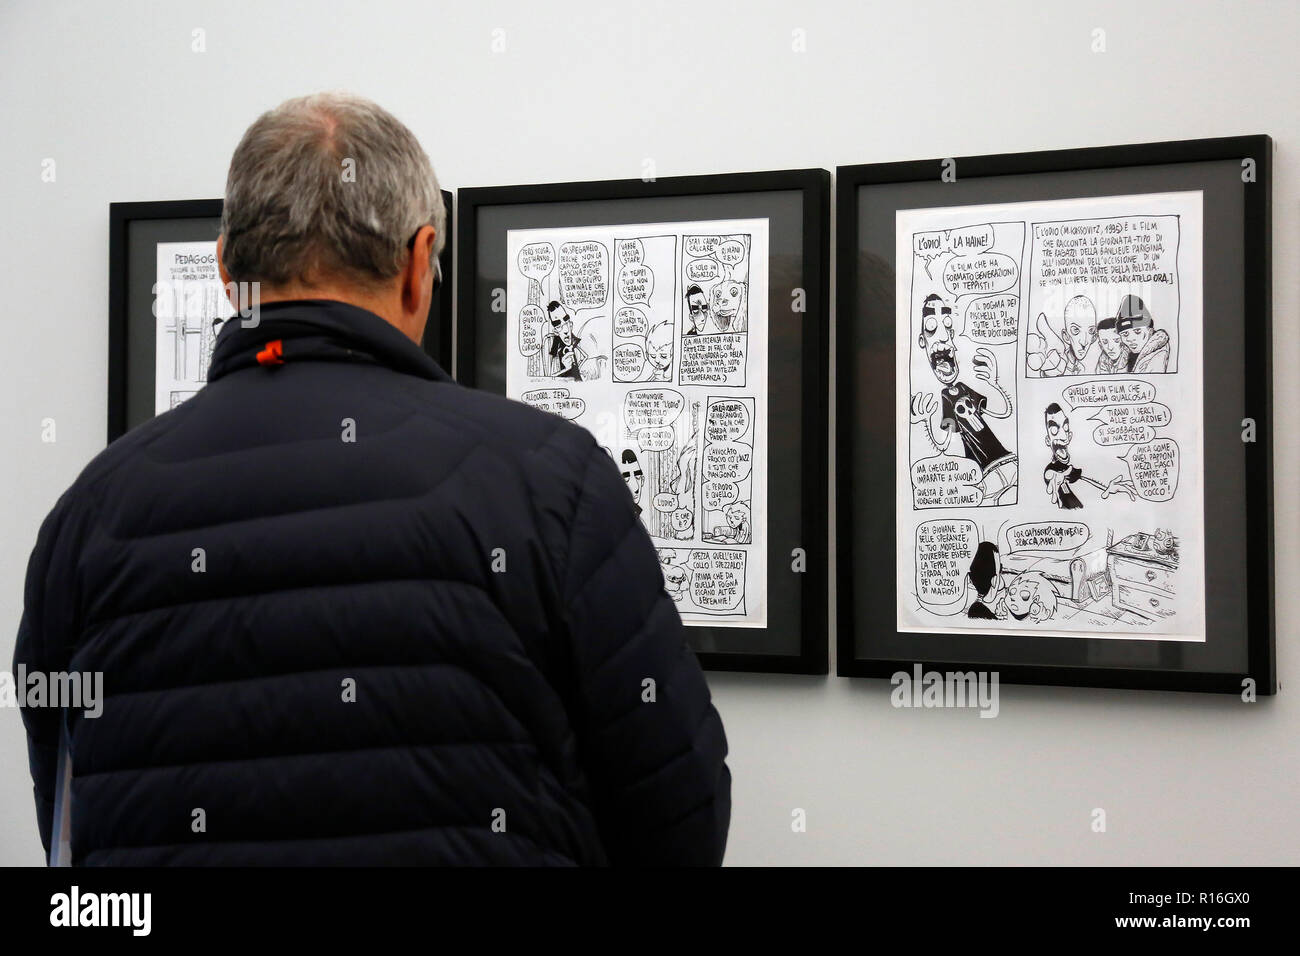 Rome November 9th 2018. Exhibition of the Italian cartoonist Zerocalcare, aka Michele Rech, one of the most famous in Italy, titled 'Digging ditches - feeding crocodiles'. Foto Samantha Zucchi Insidefoto Stock Photo